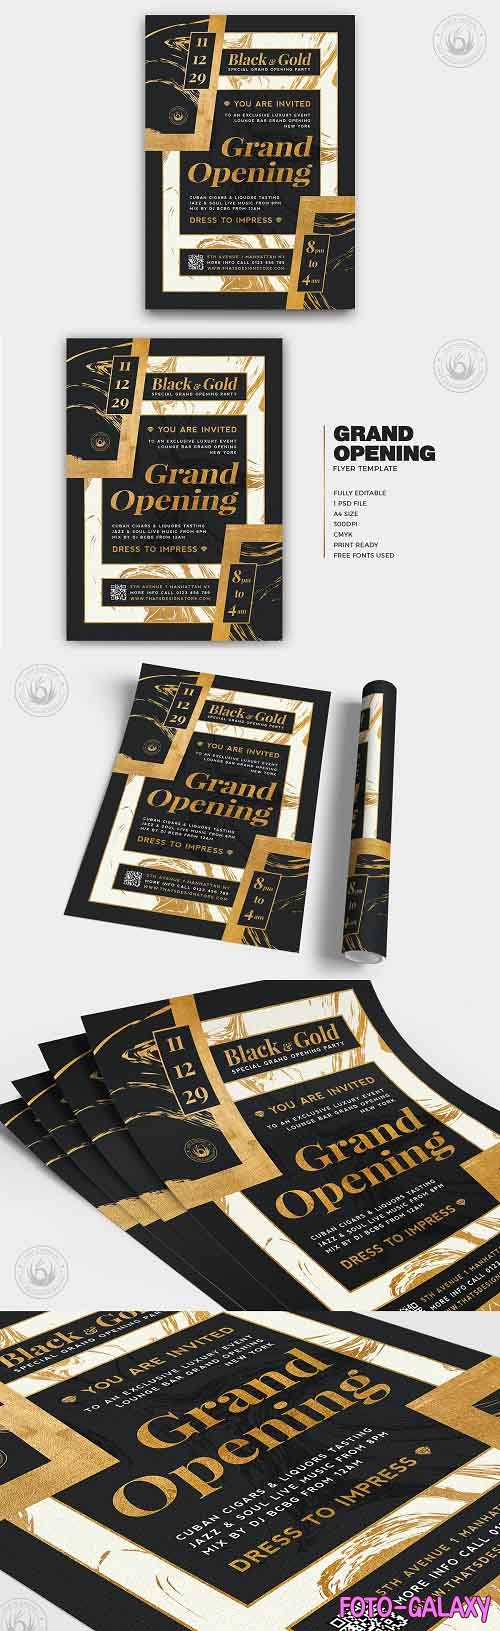 Grand Opening Flyer Template V3 - 5499182